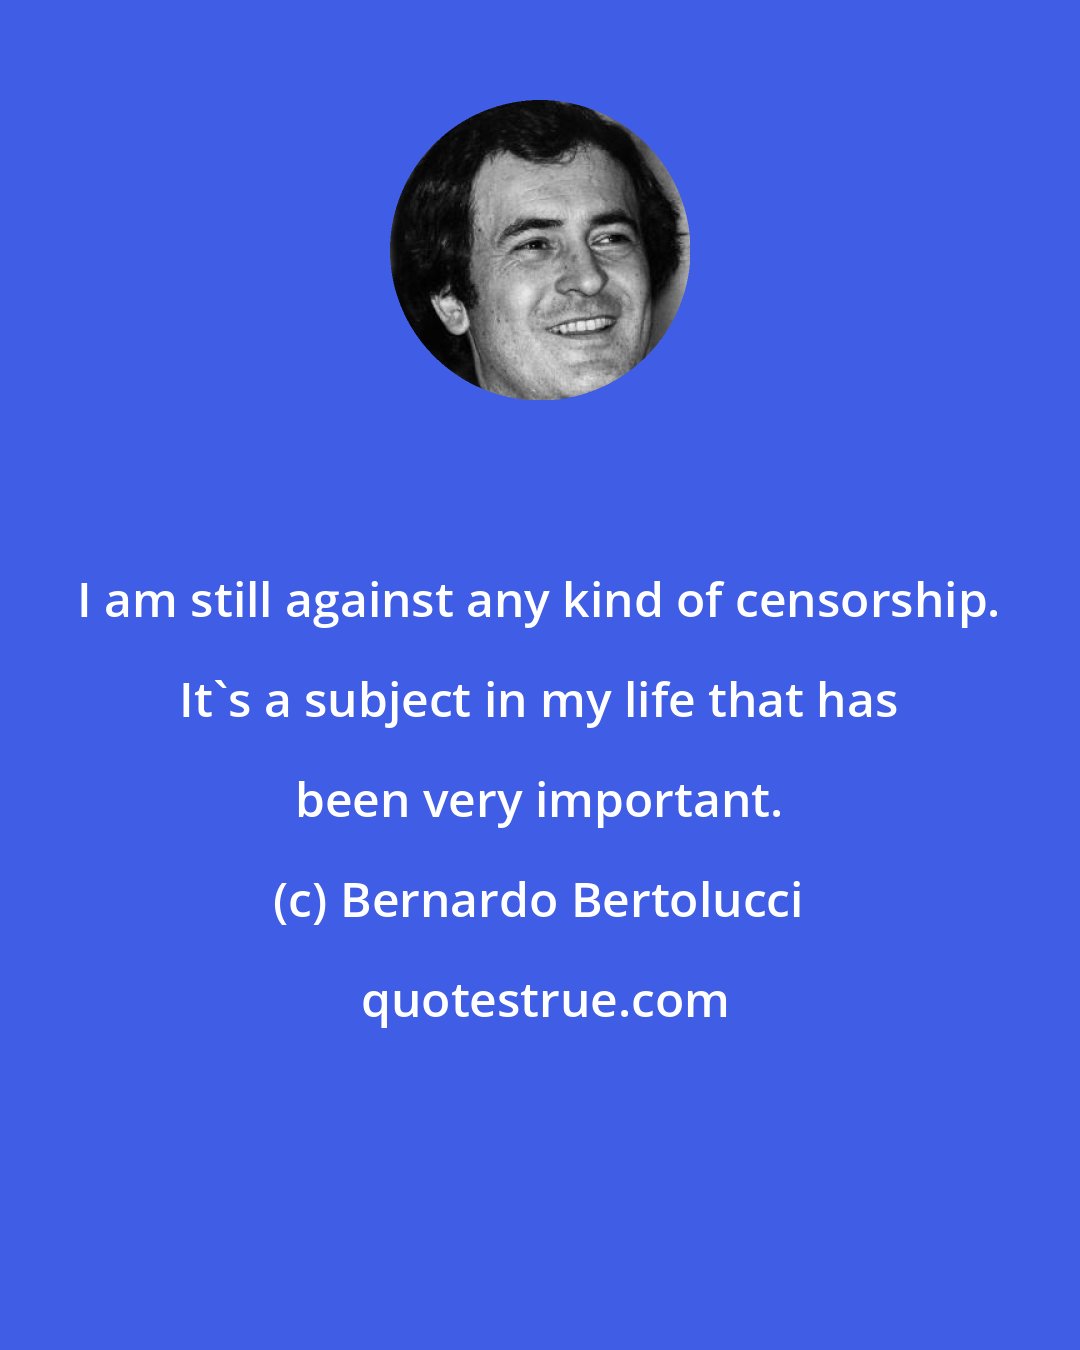 Bernardo Bertolucci: I am still against any kind of censorship. It's a subject in my life that has been very important.